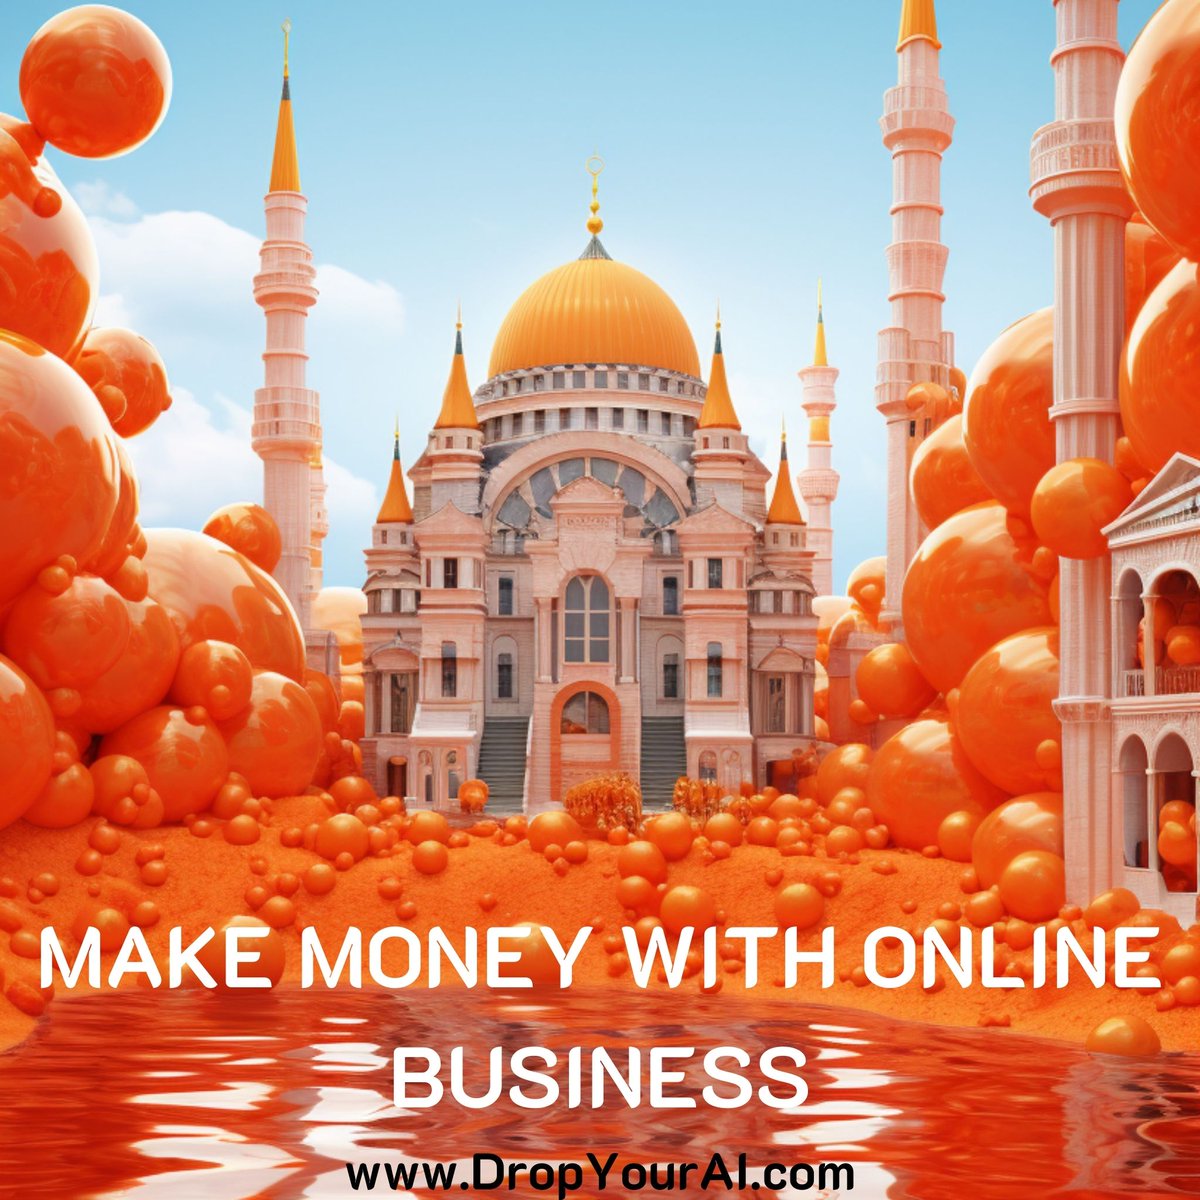 MAKE MONEY doing online business with AI tools 👇

1. Freelance Web Development

• 10Web
• Hocoos
• Landingsite

2. Freelance Coding with AI

• CodeT5
• Codeium
• CodeMate

3. Faceless YouTube Channel

• Klap
• Heygen
• Synthesia

4. Develop Chatbots for Businesses

•